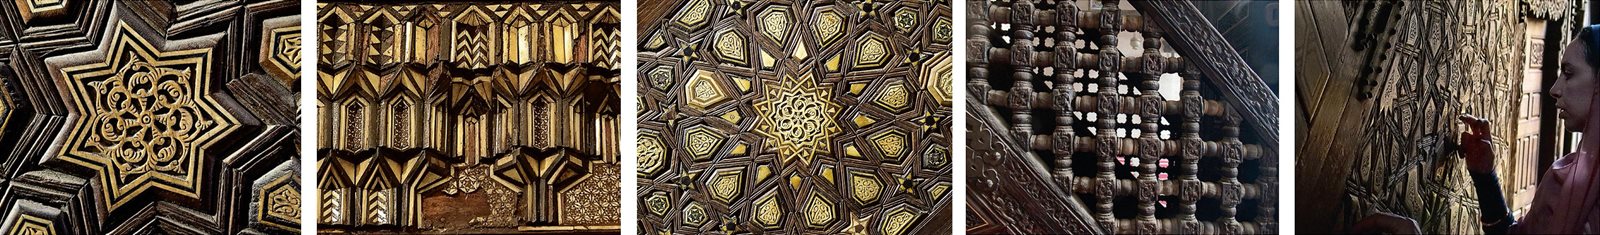 Left to opposite right This seven-point star, inlaid with ivory arabesque, made possible a design transition from a six- or 12-point pattern to an eight-point one. This muqarnas above a minbar door is missing several pieces at the bottom. This 12-point star was made radiant through interwoven ivory strapwork and a swirling central arabesque. This balustrade is made of mashrabiya, or turned-wood lattice. Counting the points of stars and tracing patterns on the minbar at the Mosque of El-Ghuri.